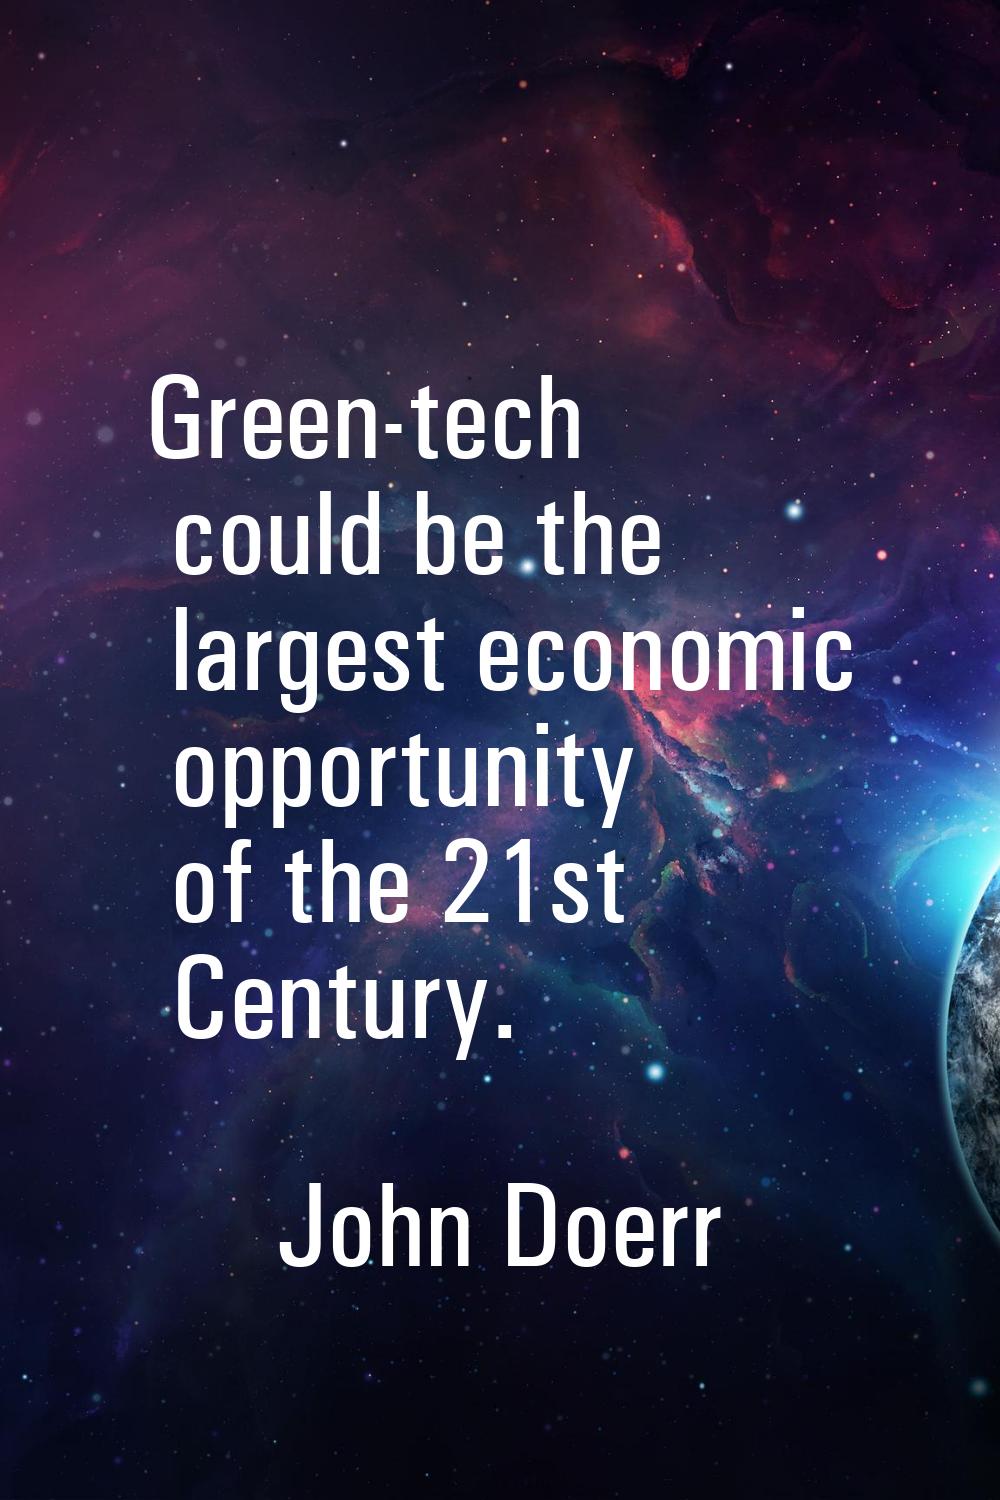 Green-tech could be the largest economic opportunity of the 21st Century.